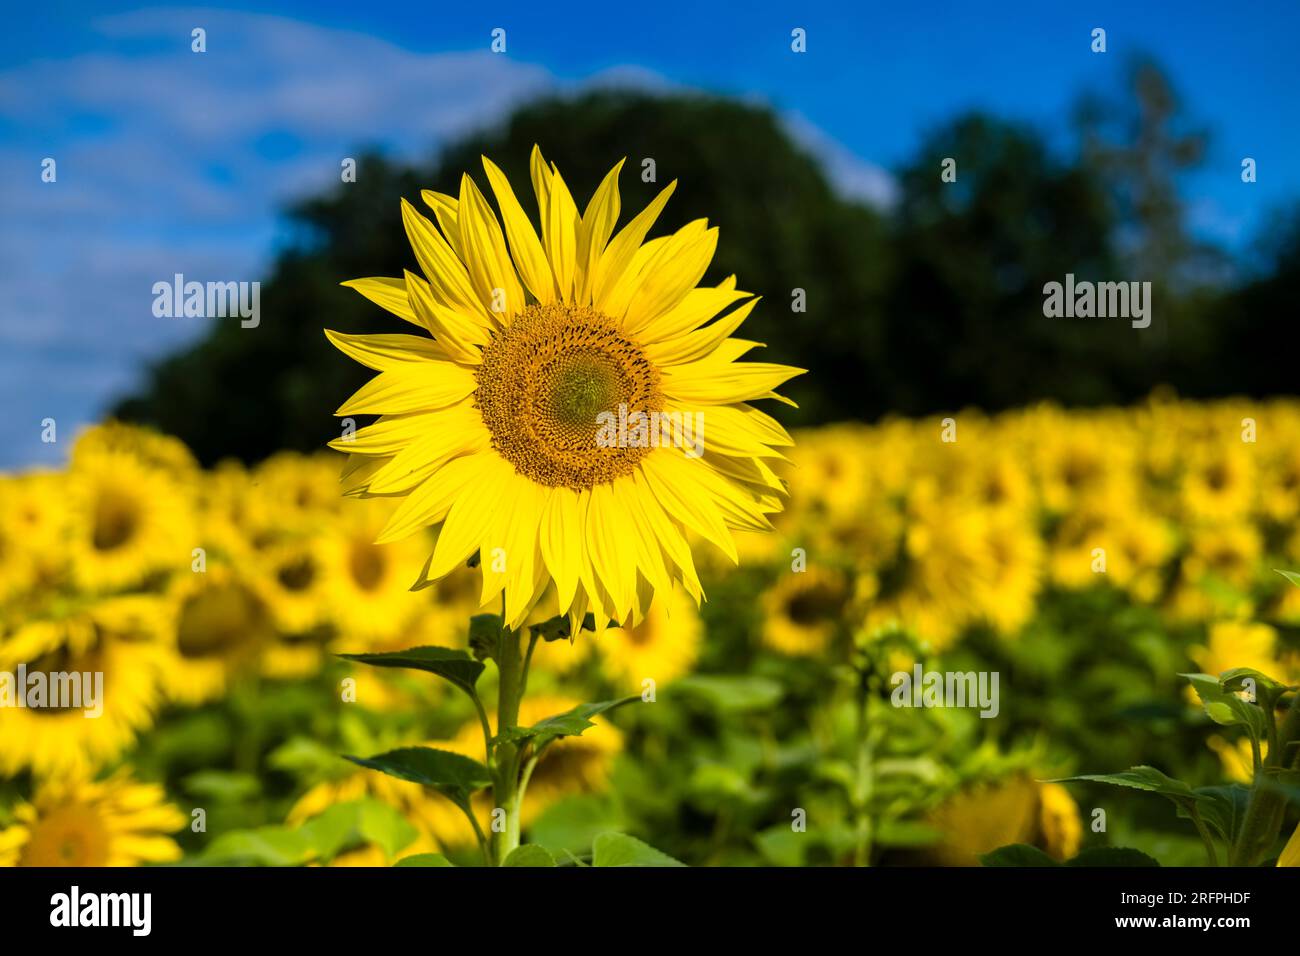 A common sunflower (Helianthus annuus) is standing out of a whole sunflower field. Stock Photo